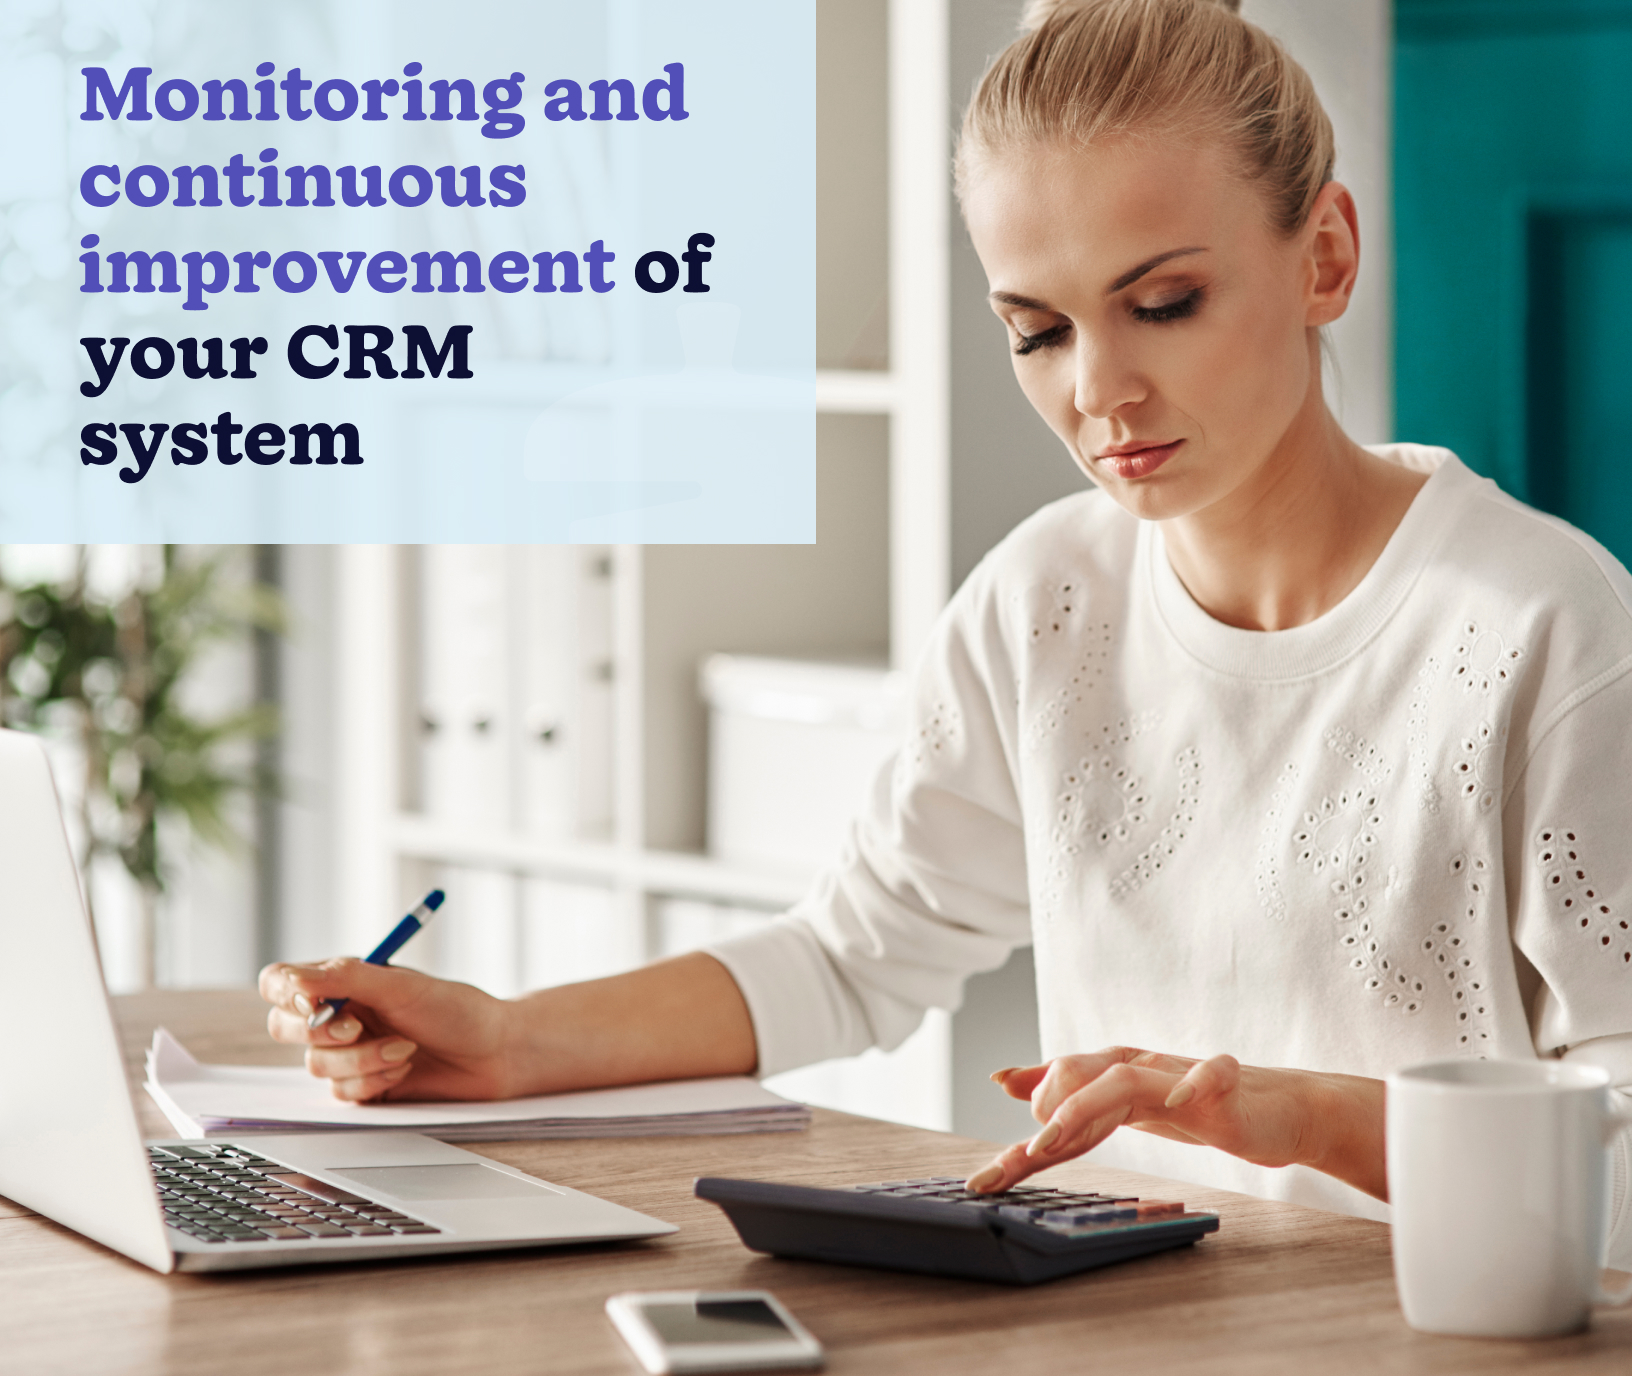 Monitoring and continuous improvement of your CRM system